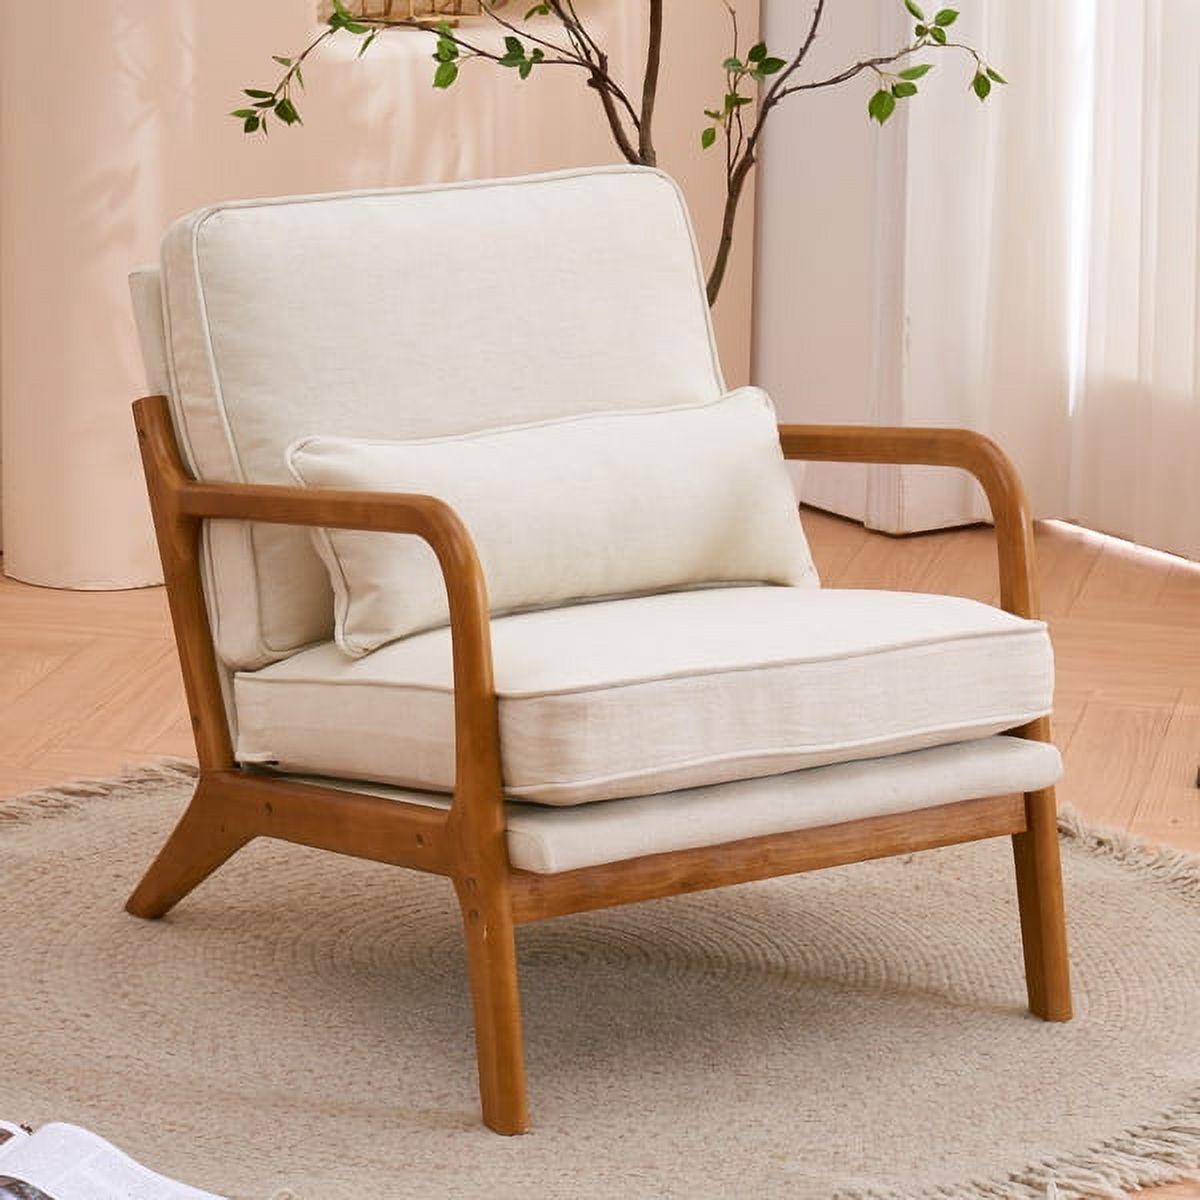 Accent Chairs, Single Linen Lounge Reading Armchair with Solid Wood Frame, Mid Century Modern Easy Assembly Arm Chairs for Living Room-Beige - image 1 of 8